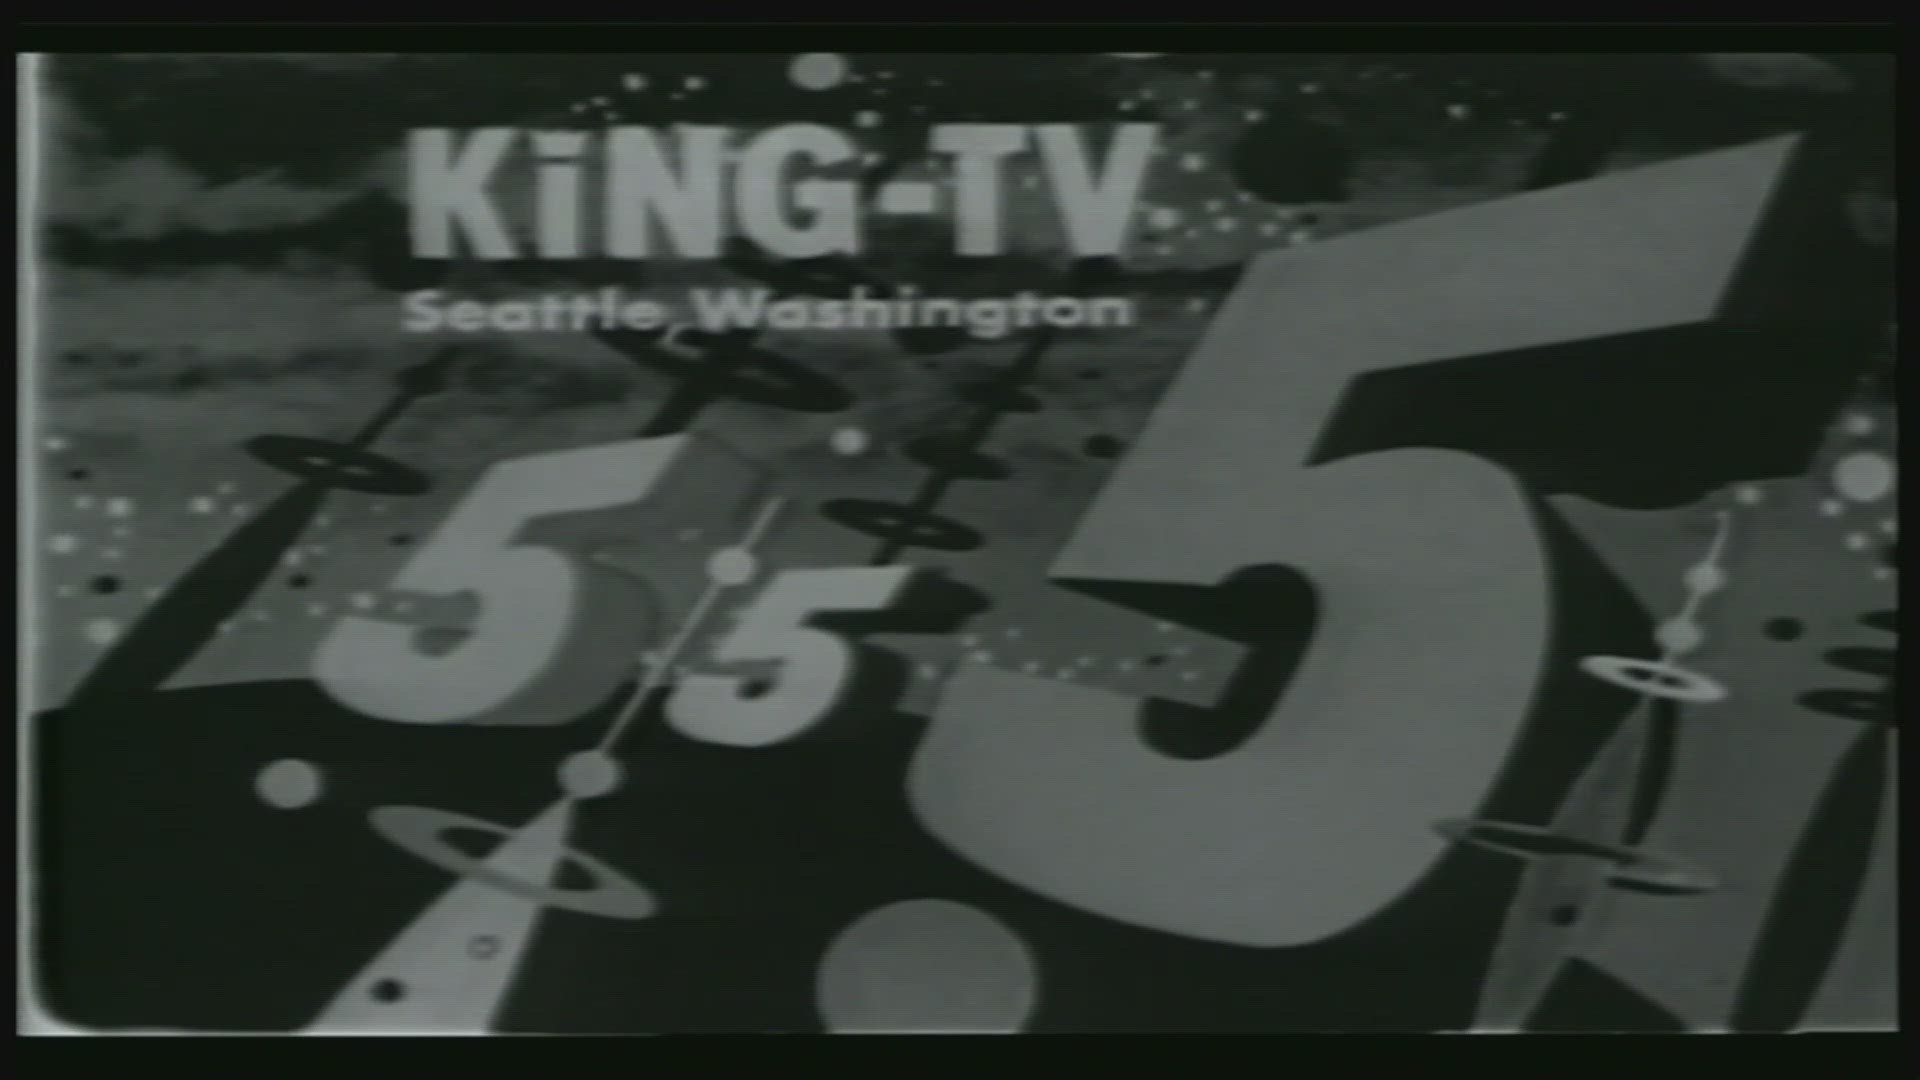 The first programs on KING 5 TV